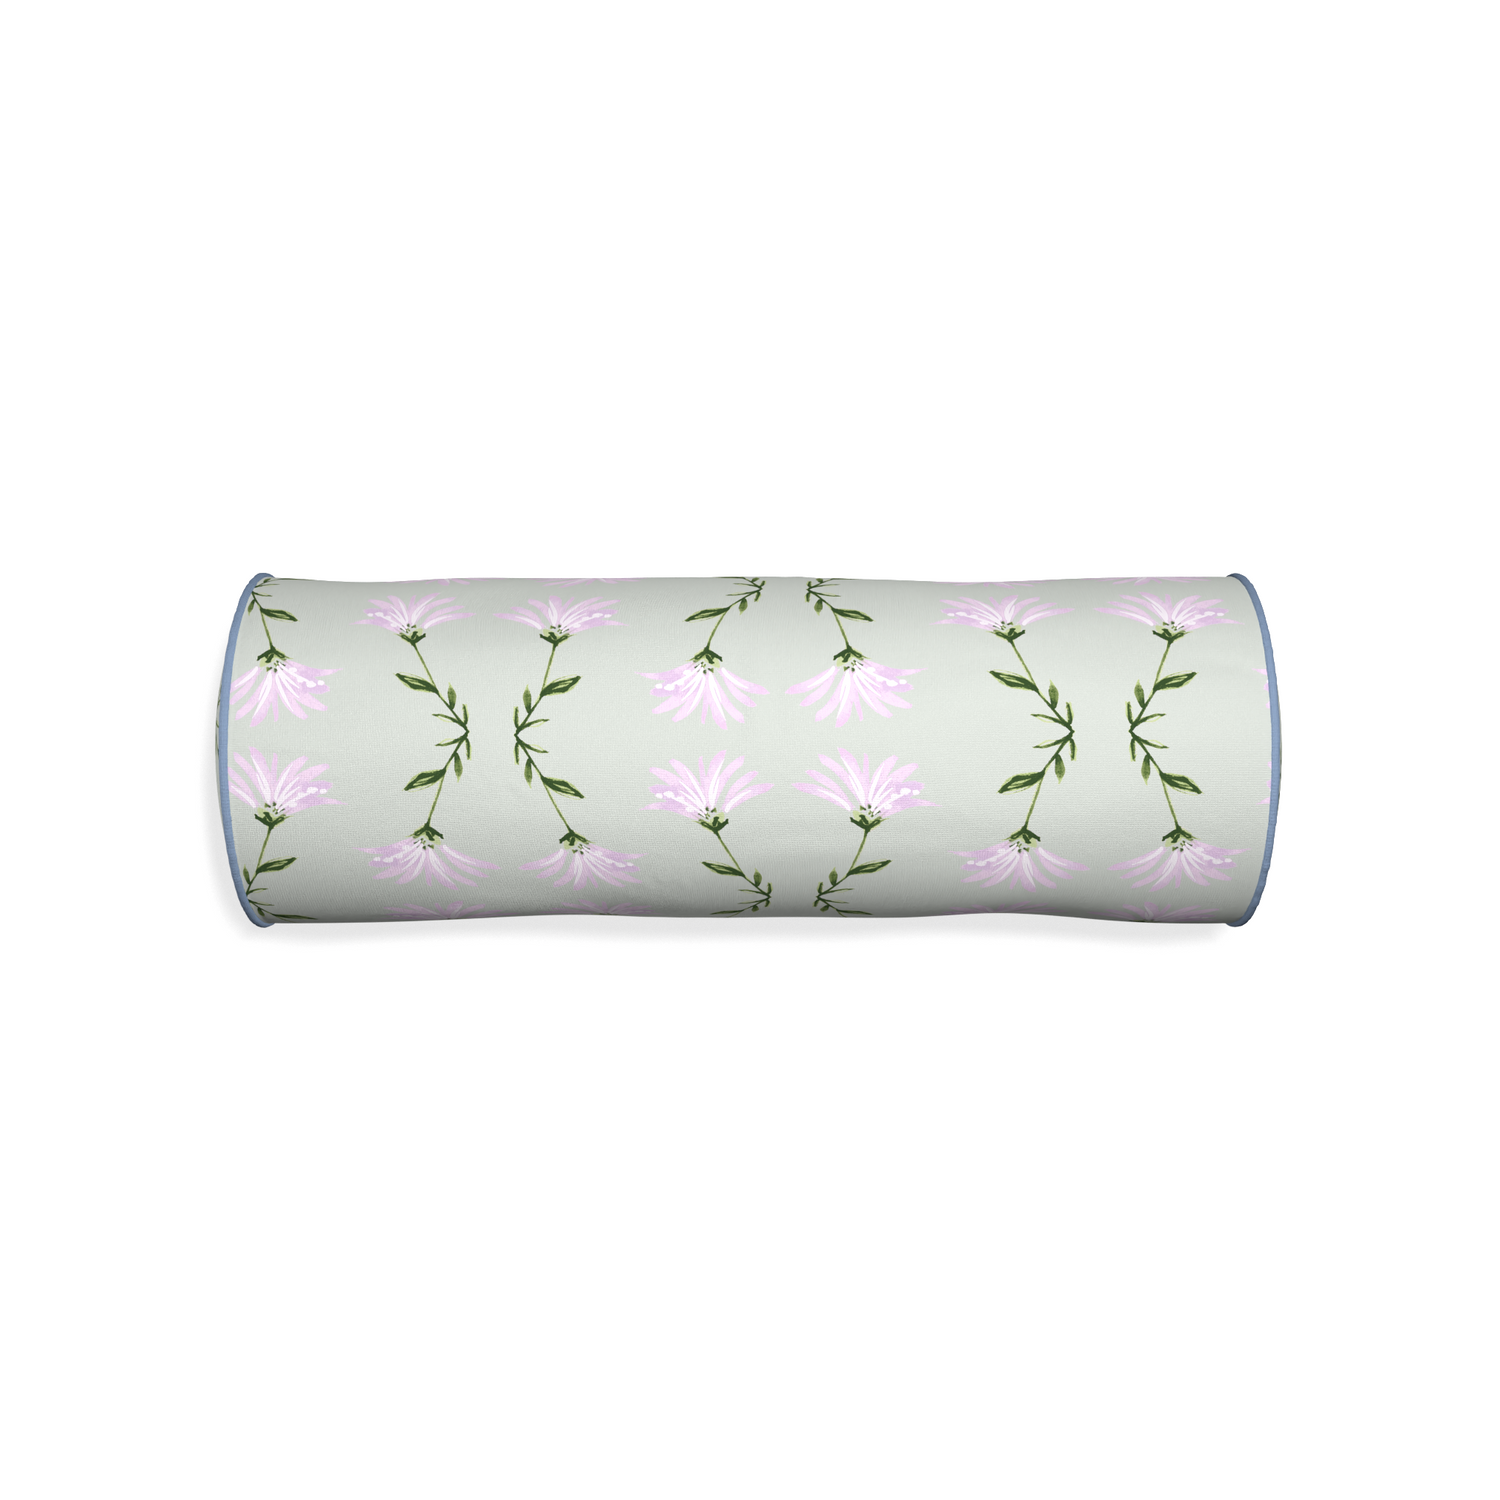 Bolster marina sage custom pillow with sky piping on white background